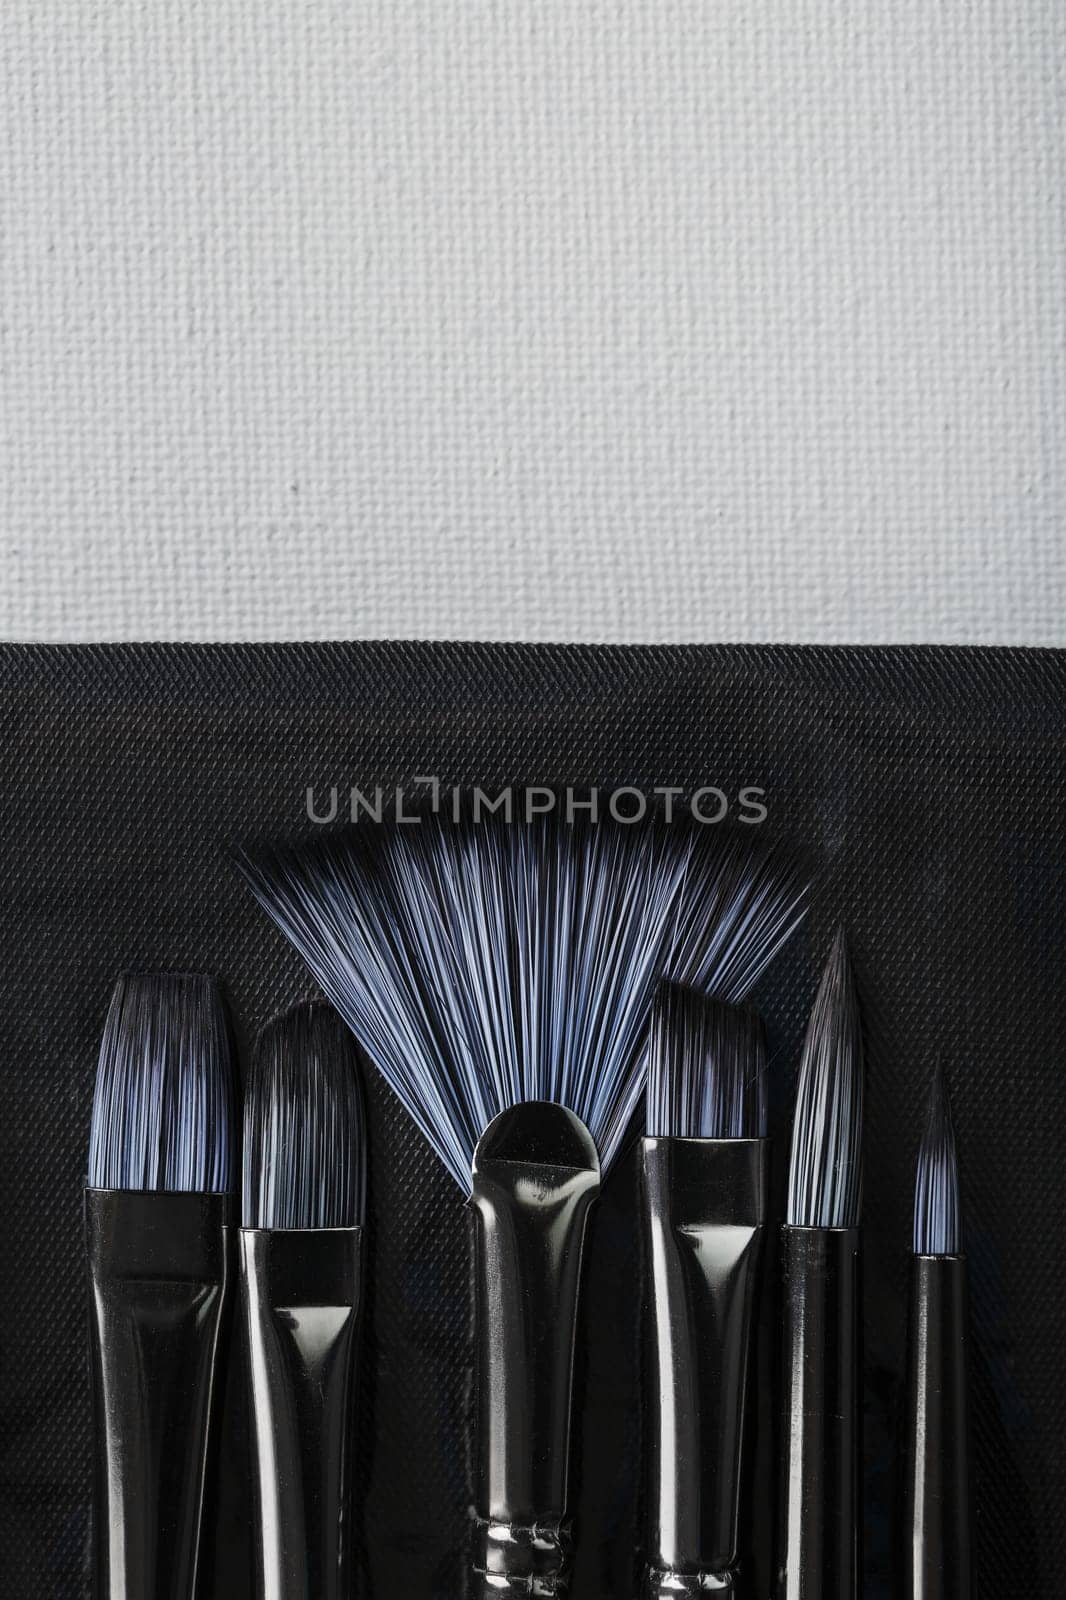 A set of art brushes for drawing on a white background, Close-up